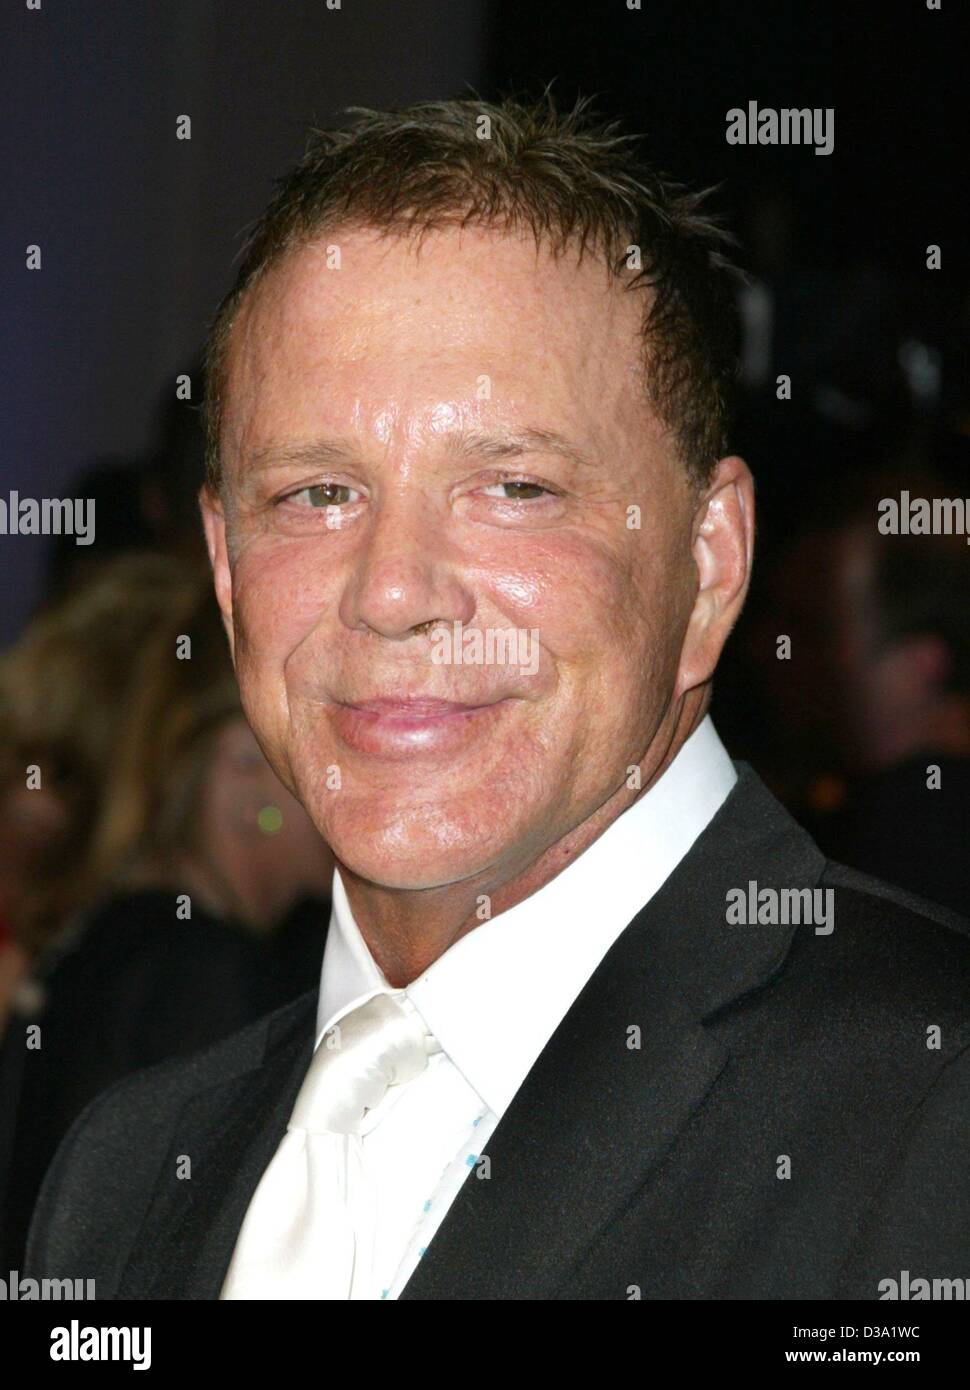 (dpa) - Hollywood actor Mickey Rourke ('9 1/2 Weeks', 'Angel Heart') at the 'Vanity Fair' party in Morton's Restaurant following the 74th Oscar award ceremony in Los Angeles, 24 March 2002. Stock Photo